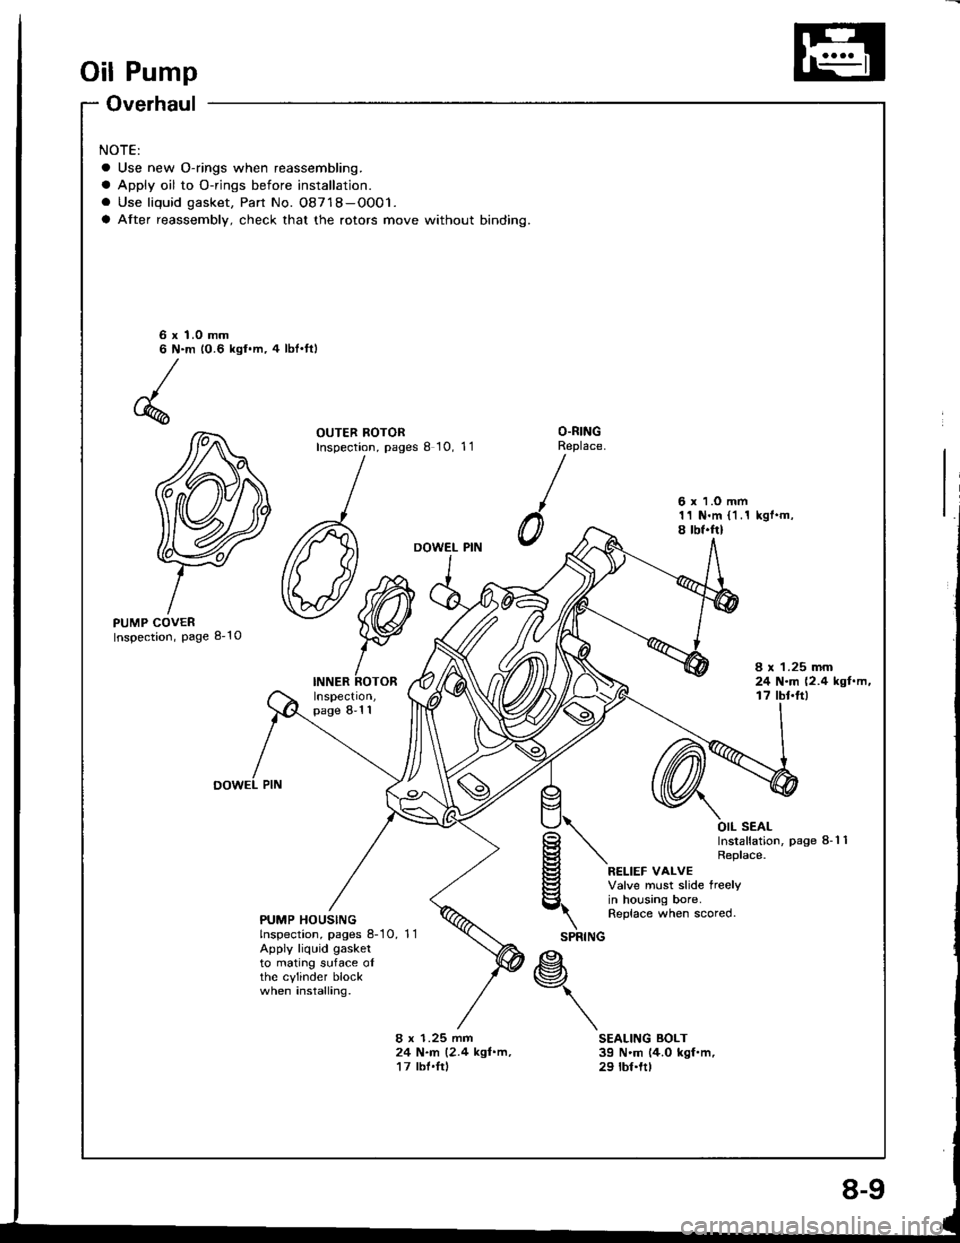 HONDA INTEGRA 1994 4.G Workshop Manual Oil Pump
Overhaul
NOTE:
a Use new O-rings when reassembling.
a Apply oil to O-rings before installation.
. Use liquid gasket, Part No. 08718-OO01.
a After reassembly, check that the rotors move withou